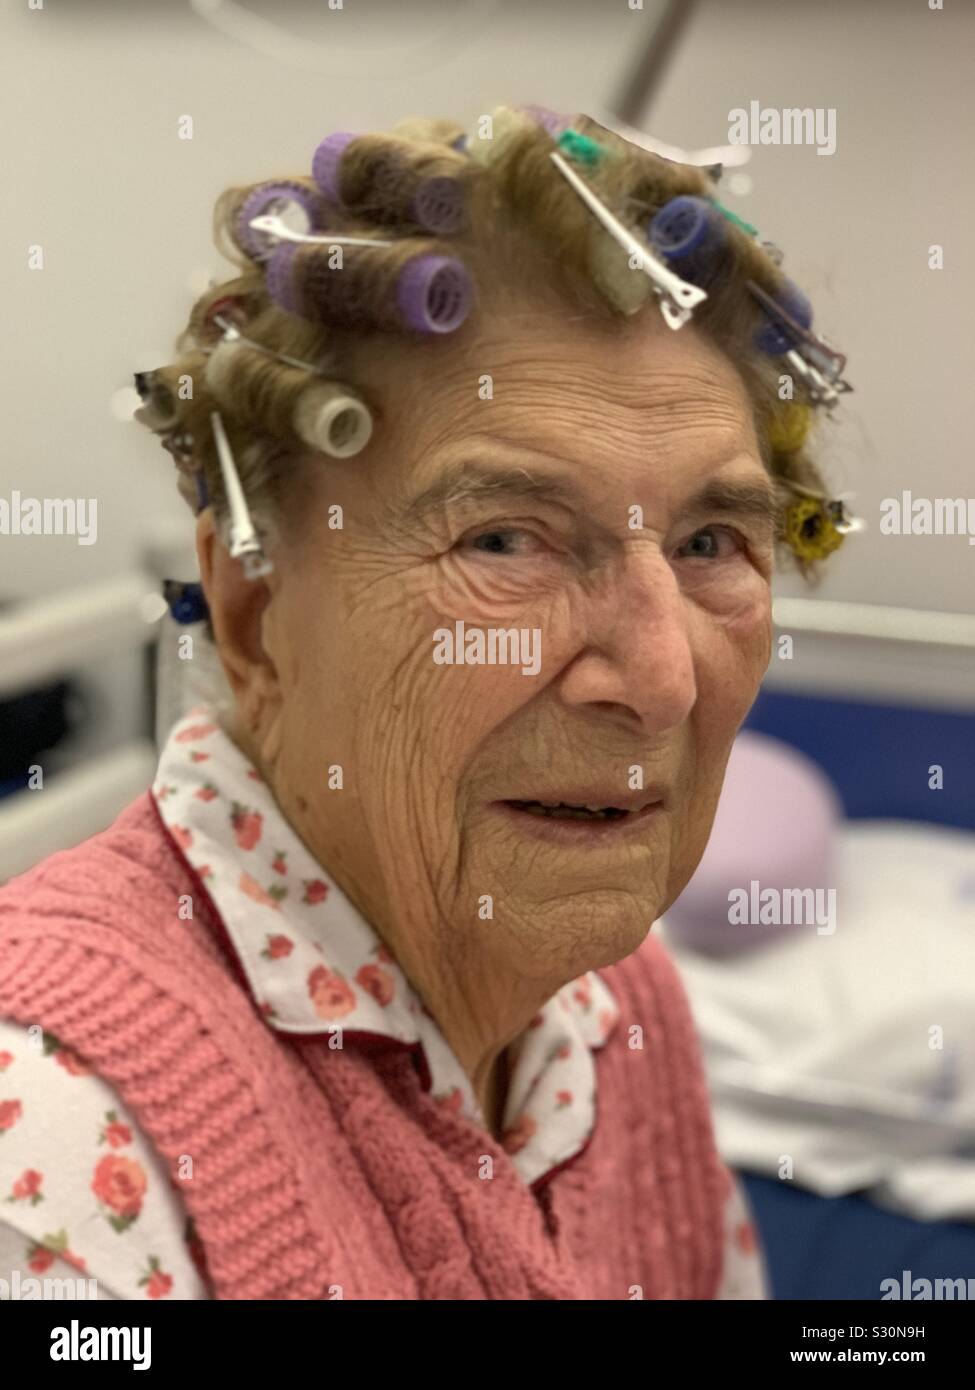 Senior woman with curlers in the hospital, fashion has no age Stock Photo